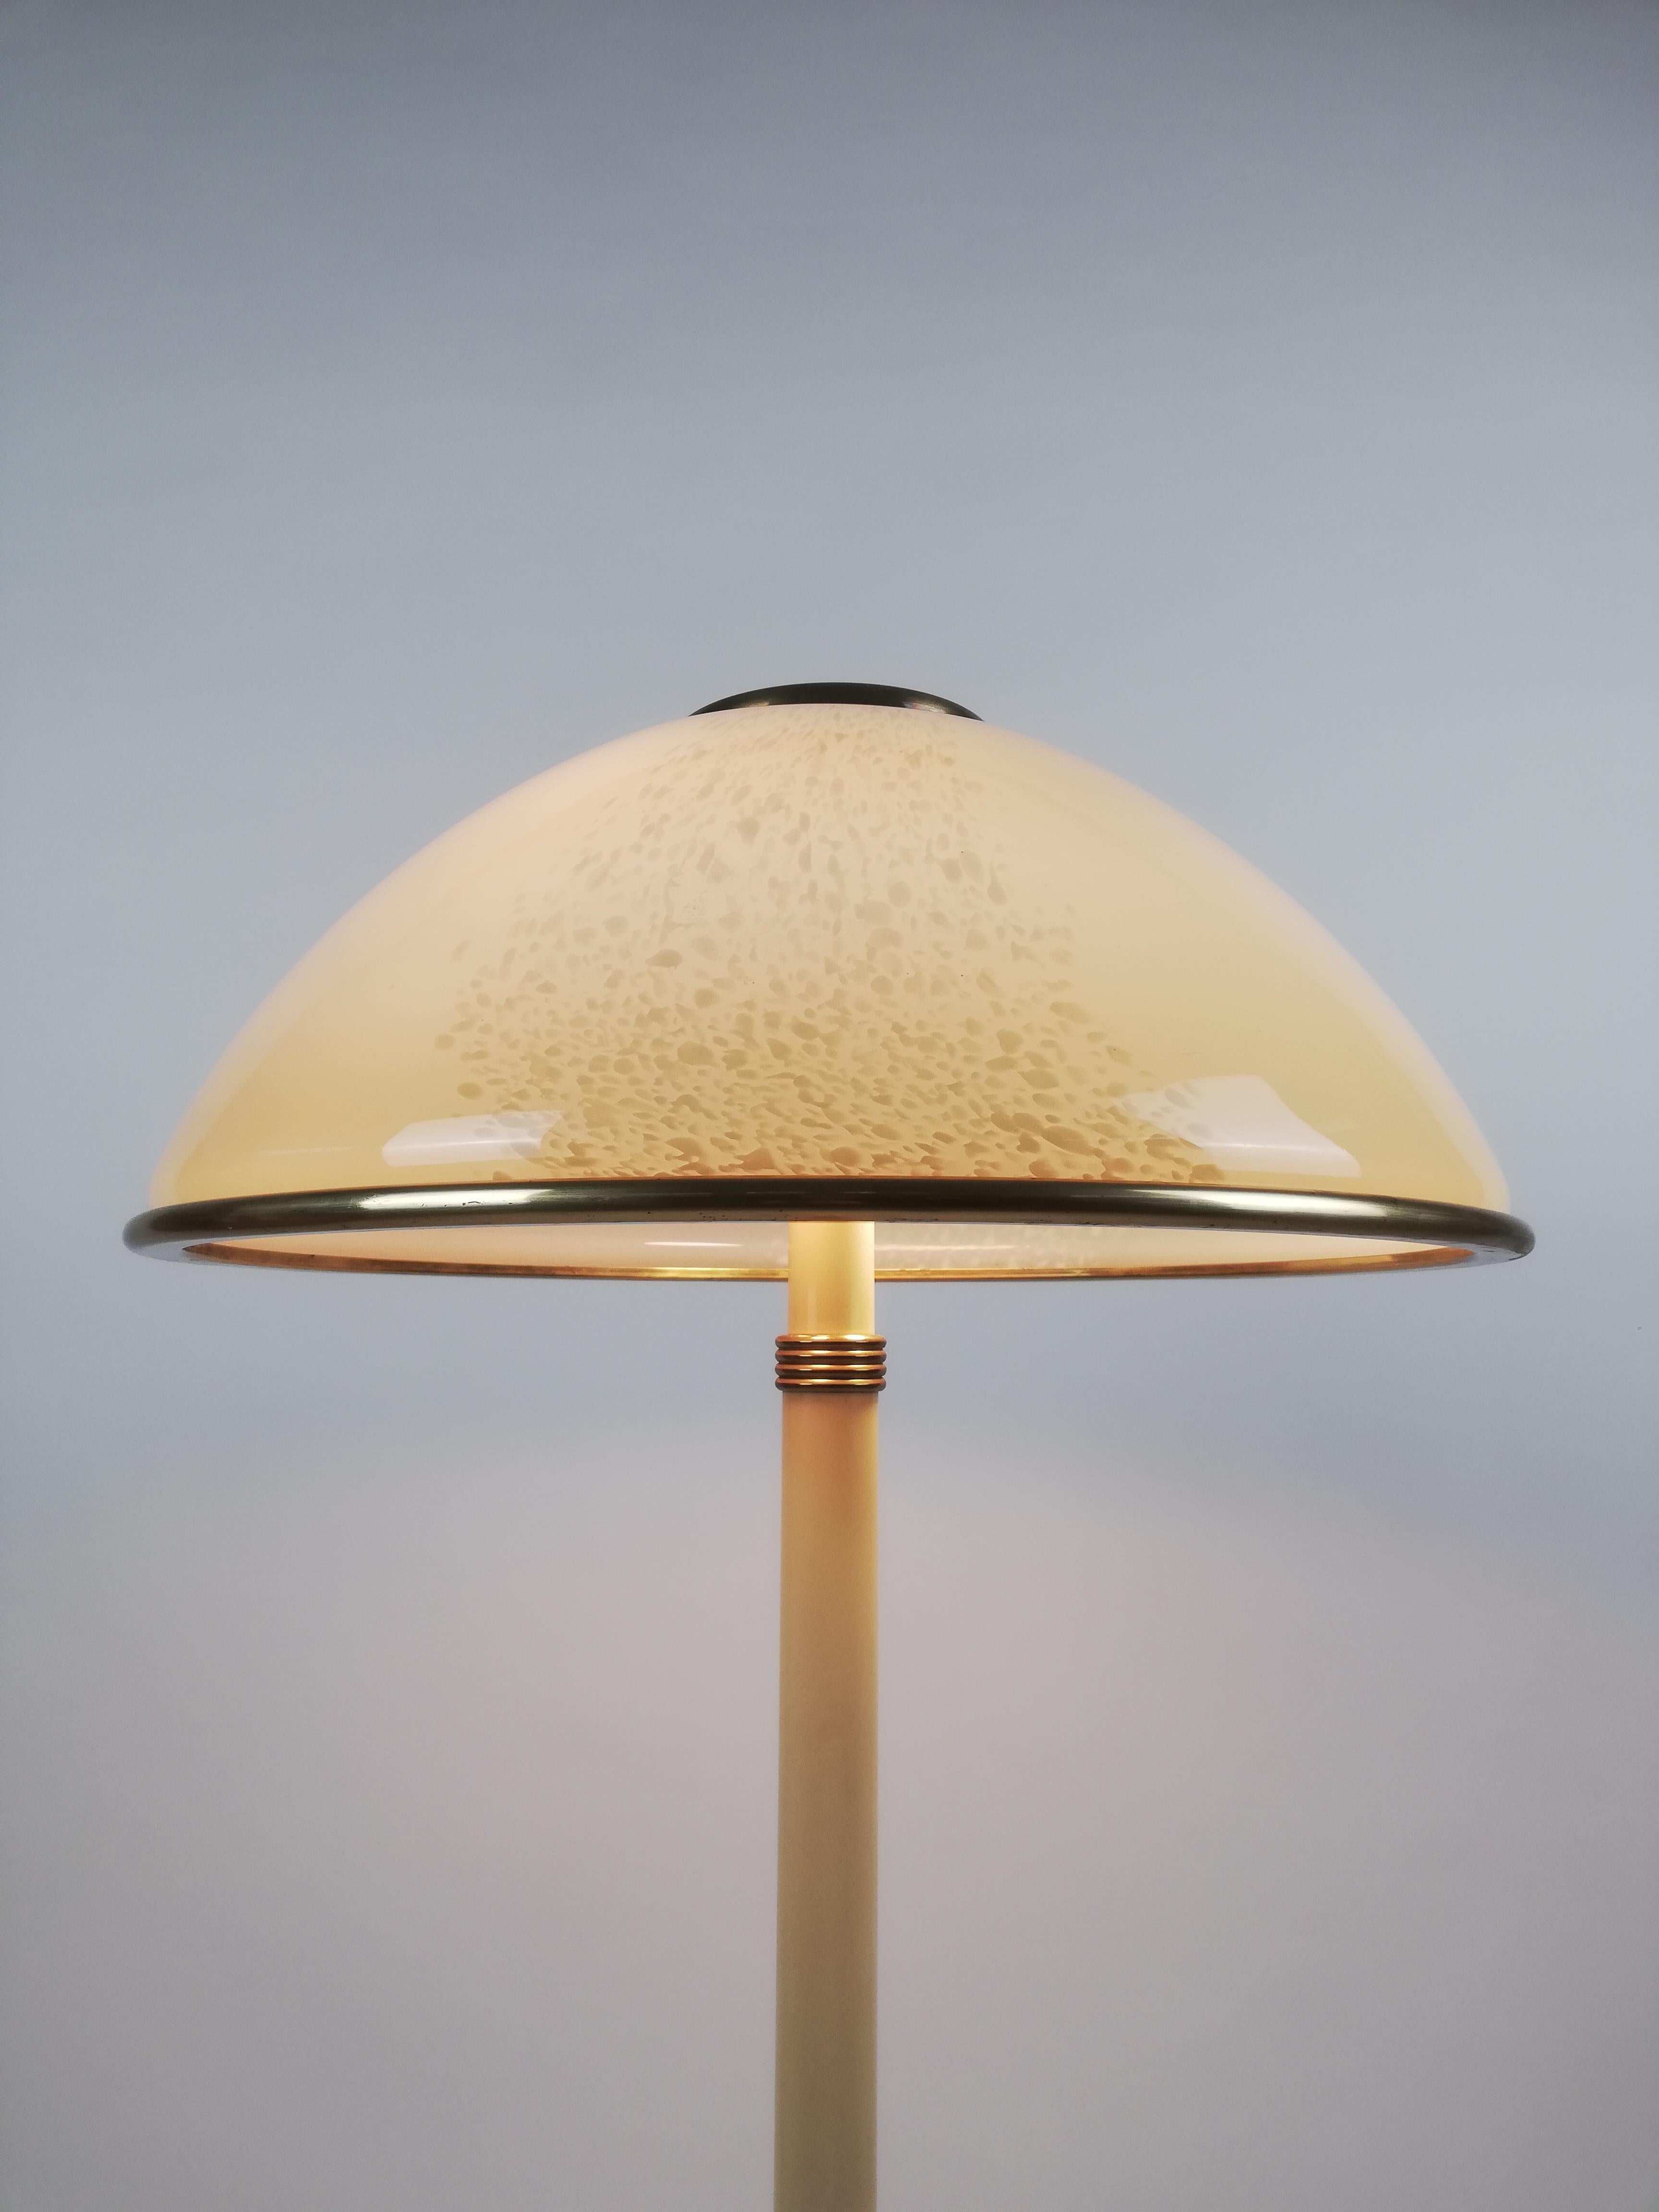 A Glamorous Floor Lamp in the typical style of the late 70s, characterized by the use of precious and sparkling materials, such as brass and chrome inserts in contrast with black and ivory colored laminates, the use of briars and mirrors also